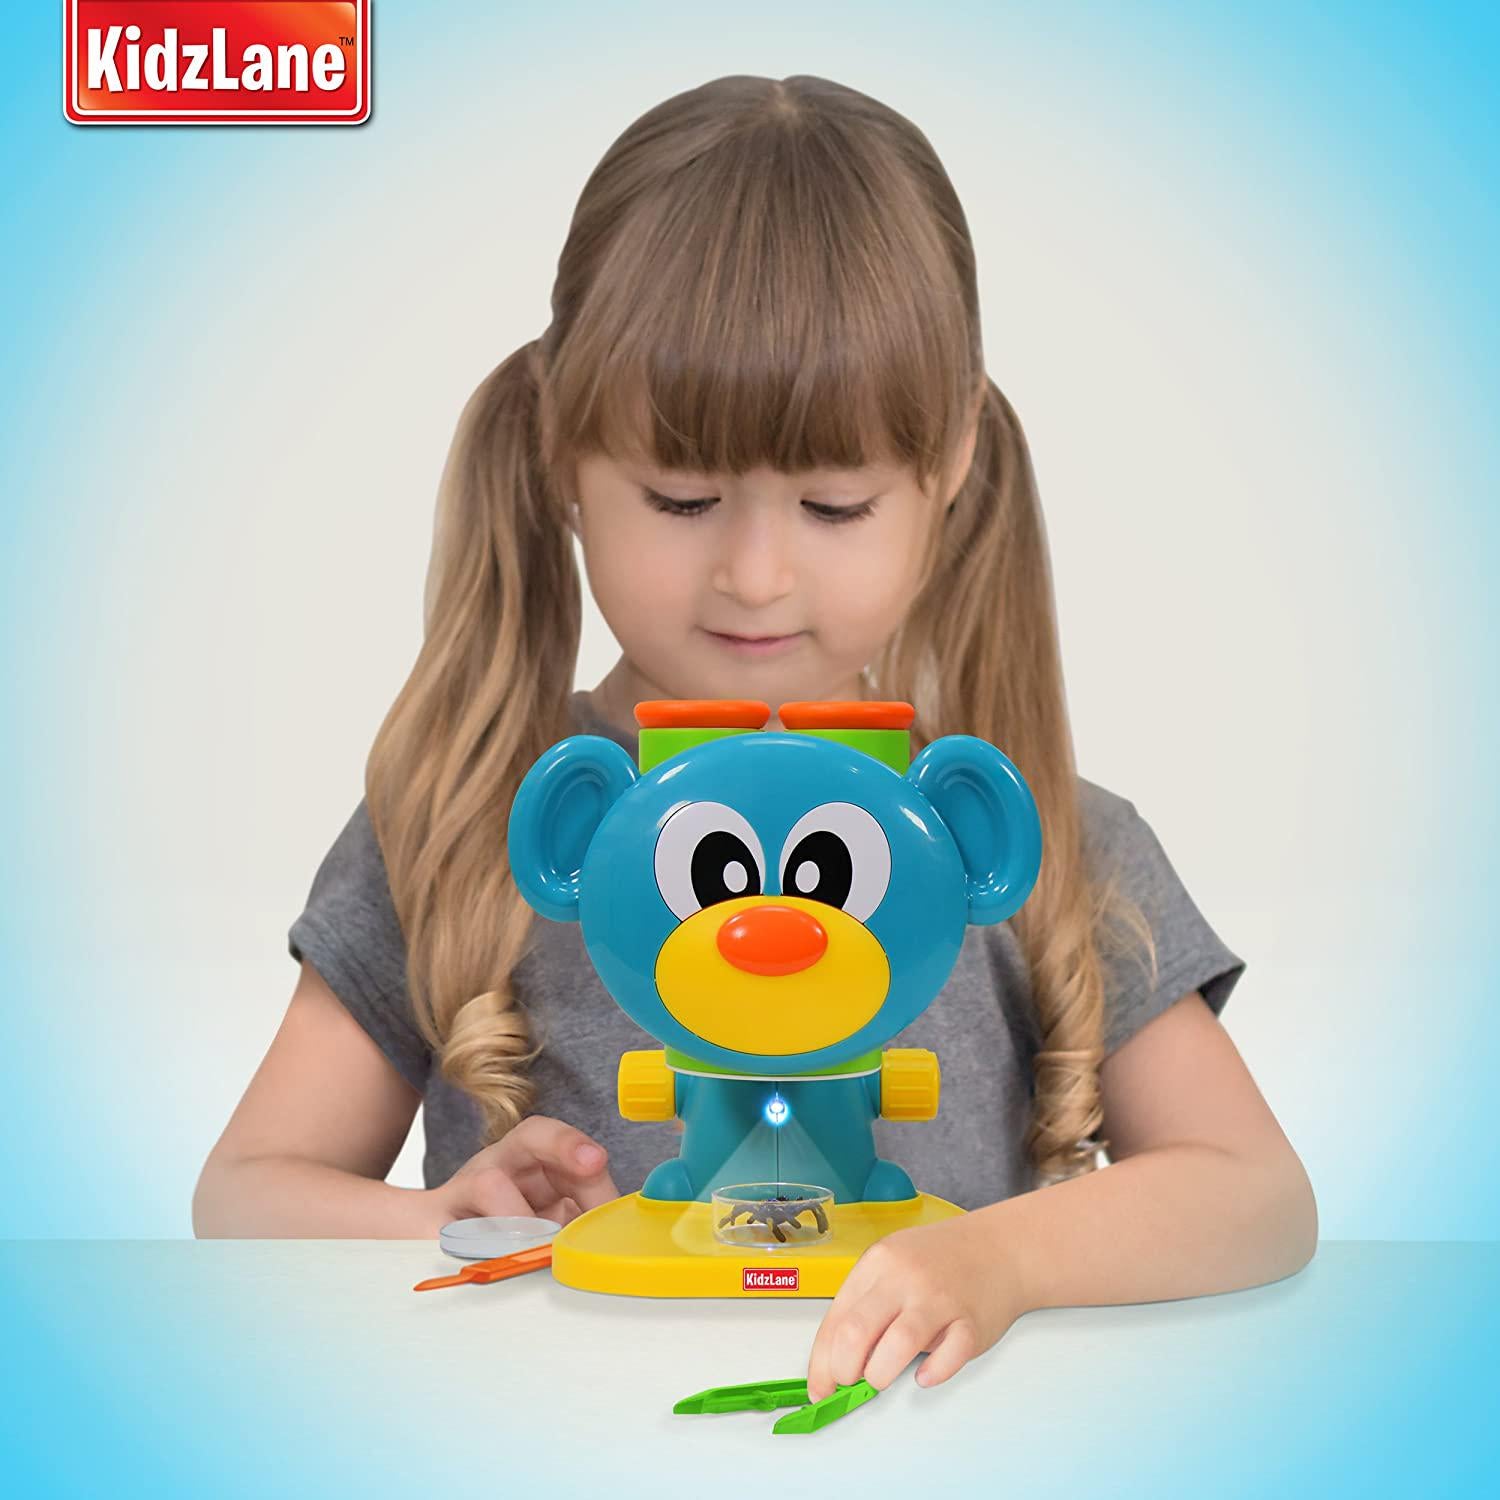 kidzlane, Microscope Science Toy for Kids - Toddler Preschool Microscope with Guide and Activity Booklet